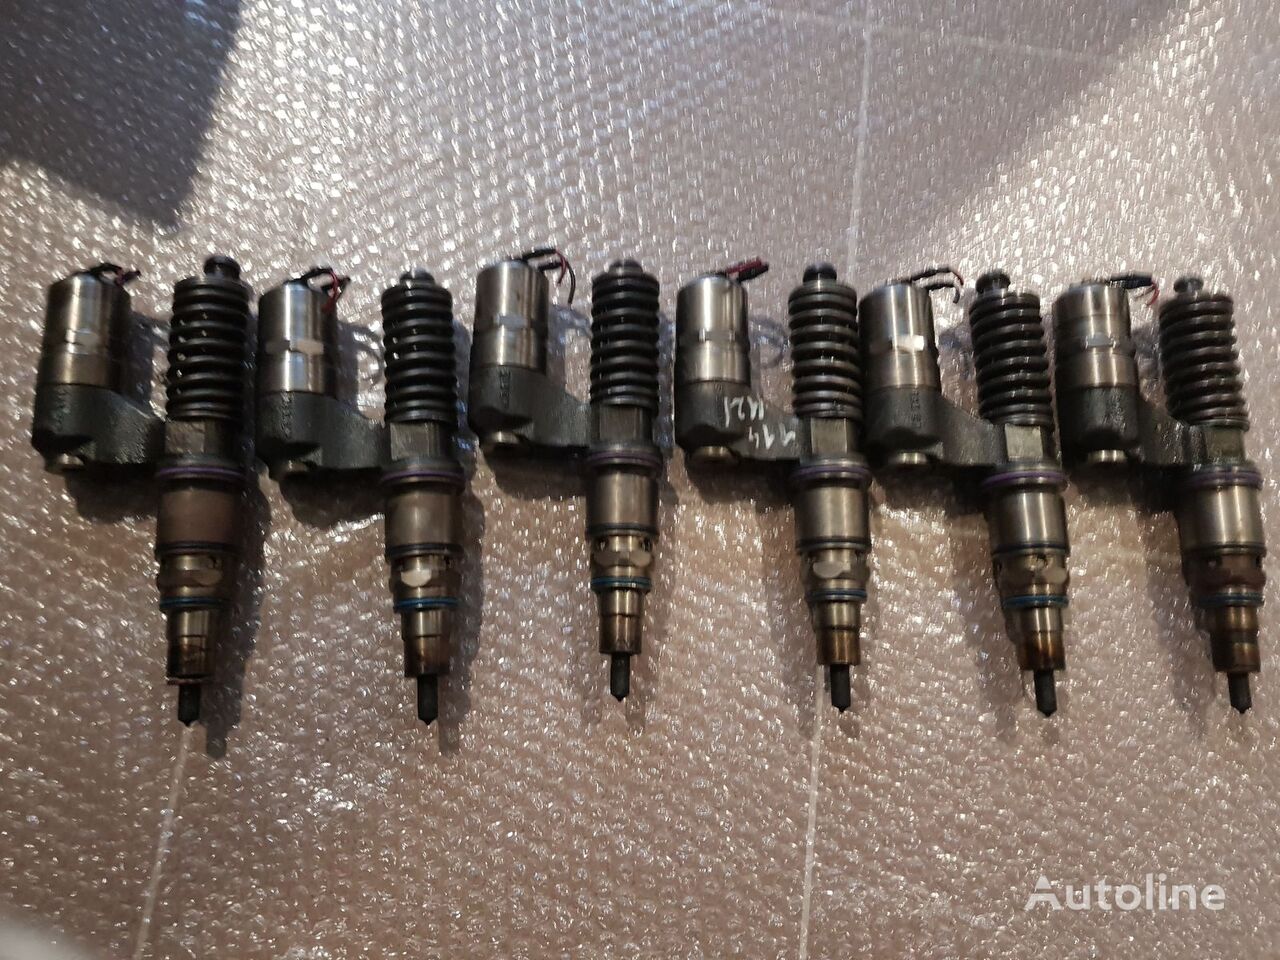 Scania 4 series, EURO2, EURO3, s, unit, BOSCH, 1874424 injector for Scania 4 series truck tractor